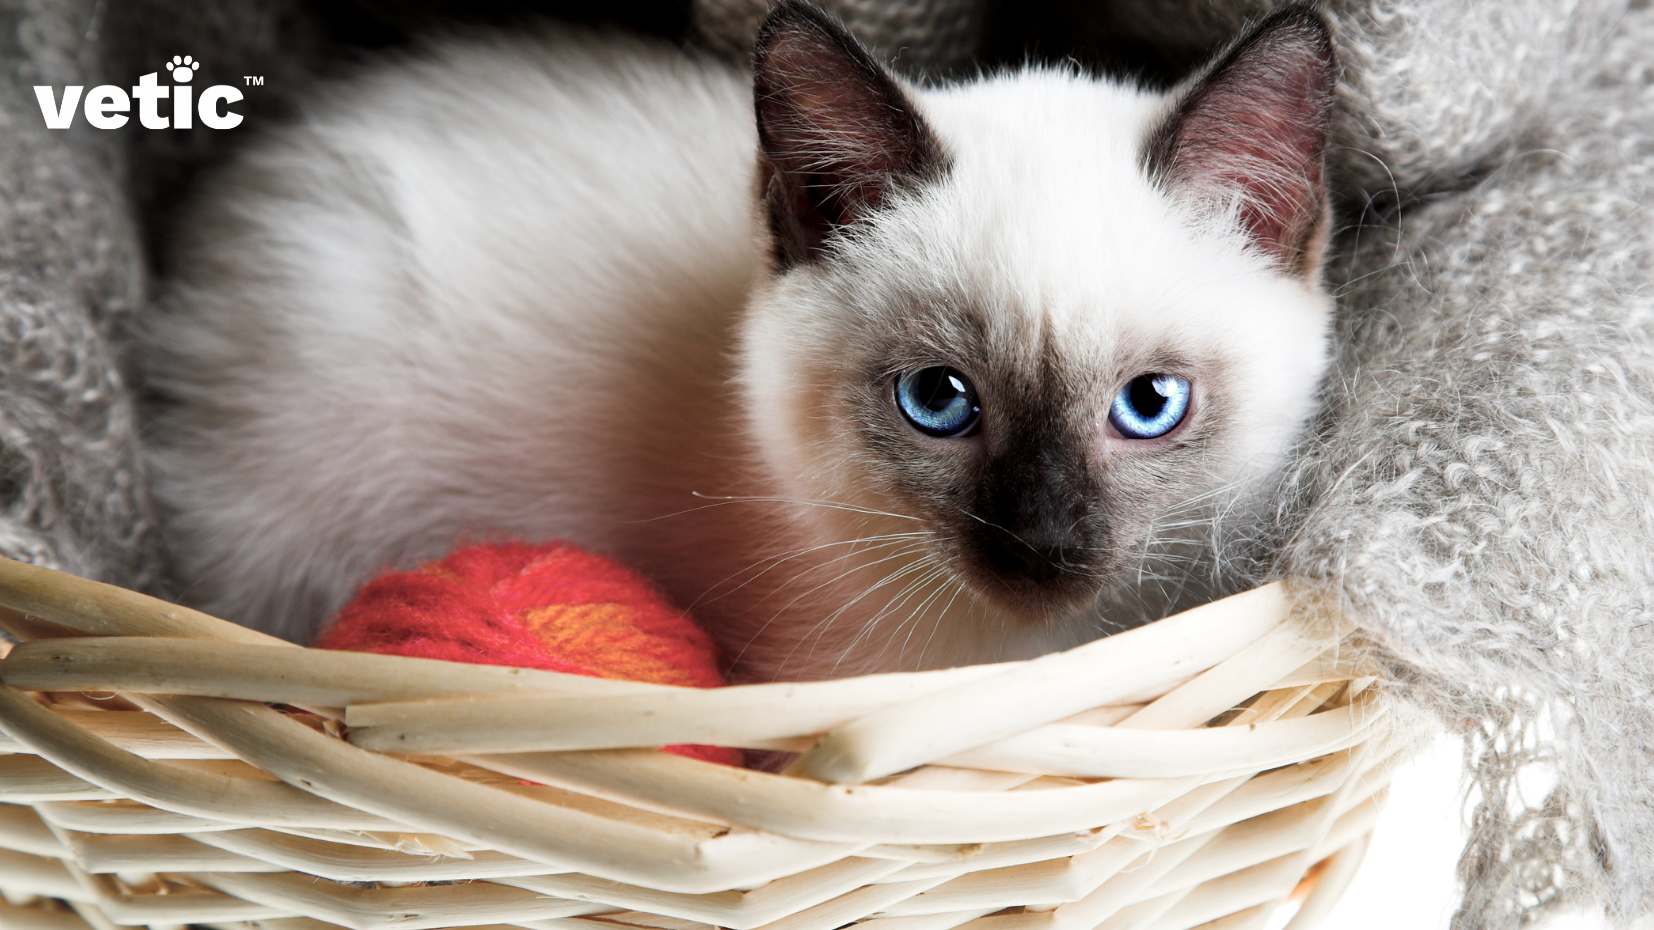 A siamese kitten with light blue eyes is sitting in a wicker basket with an orange-red knitting yarn and a grey blanket. While getting a siamese cat in India, check their parents' health to minimize the possibility of health risks of your kitten.